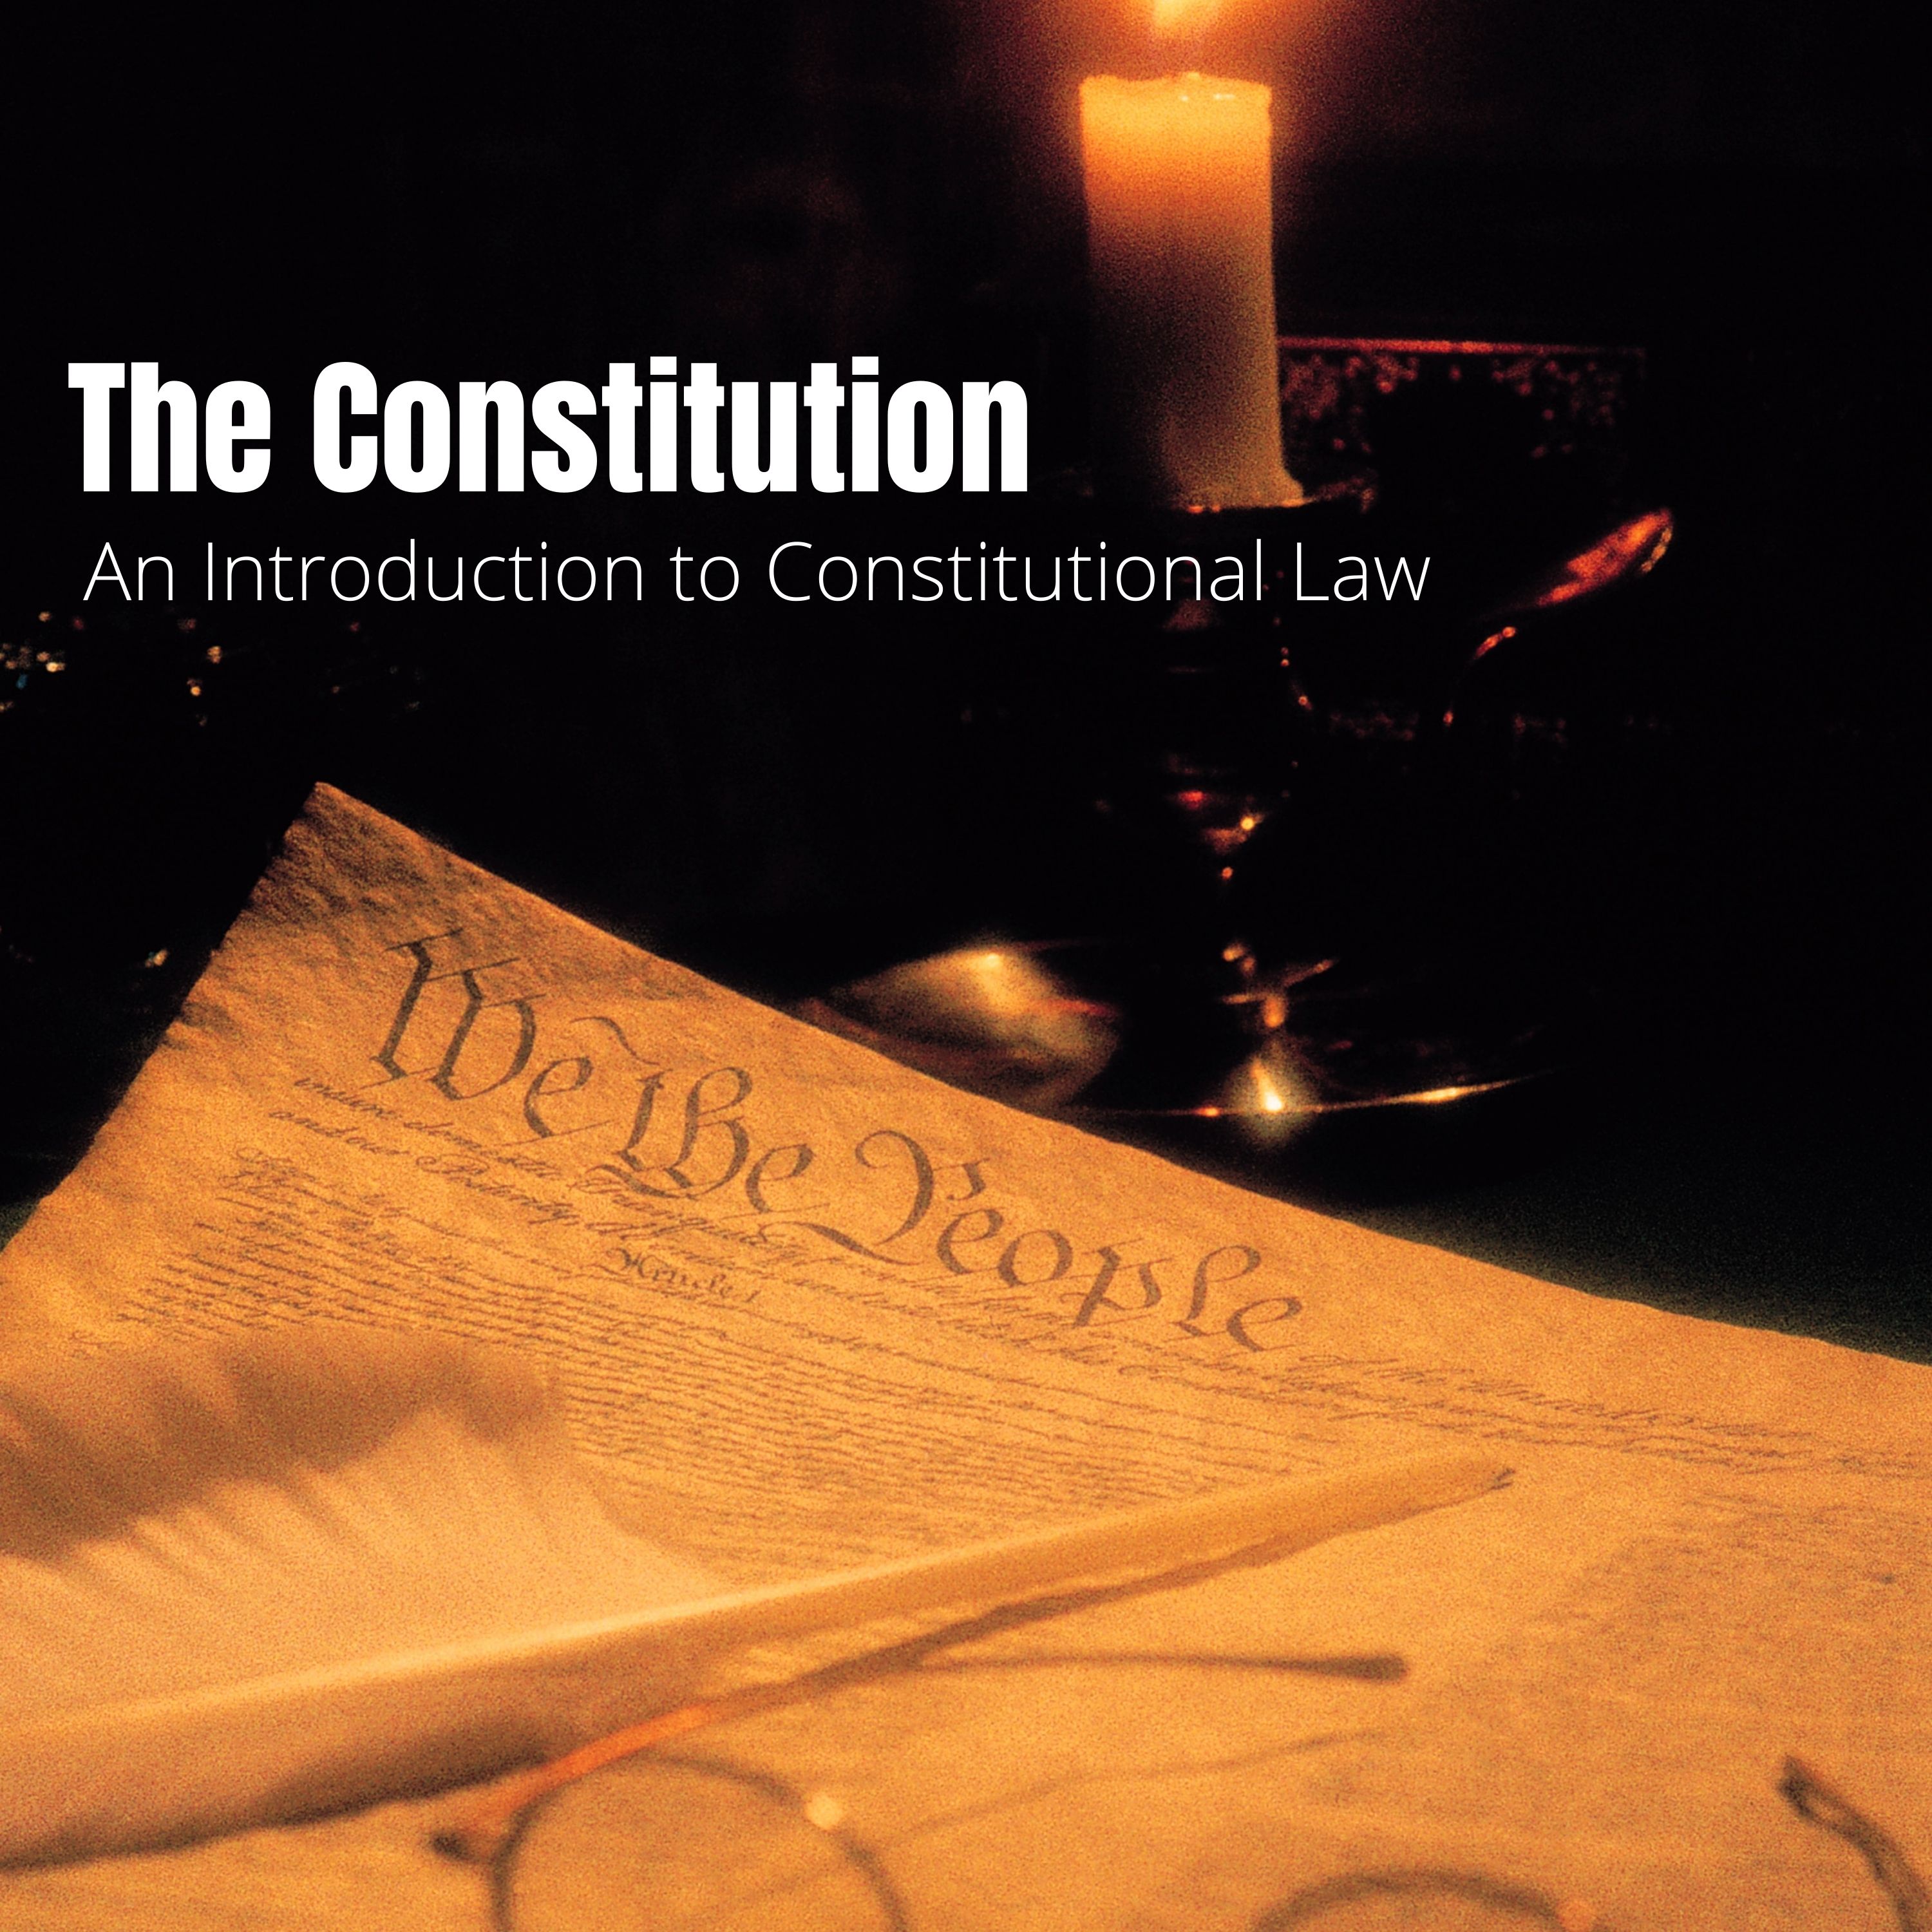 Constitutional Law - Lecture One: An Introduction to Constitutional Law